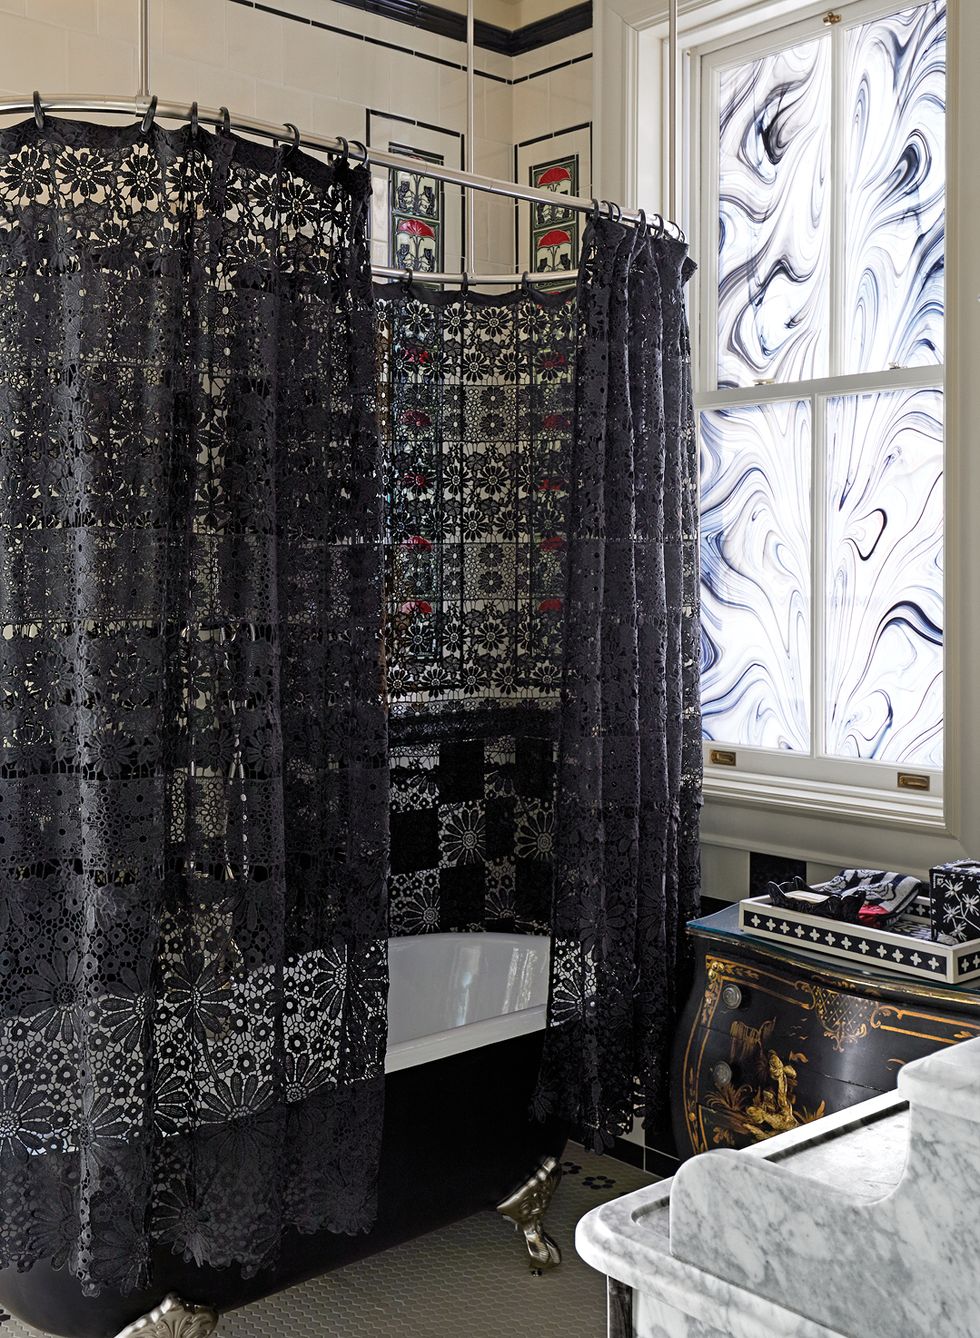 Bathroom with black lace shower curtain